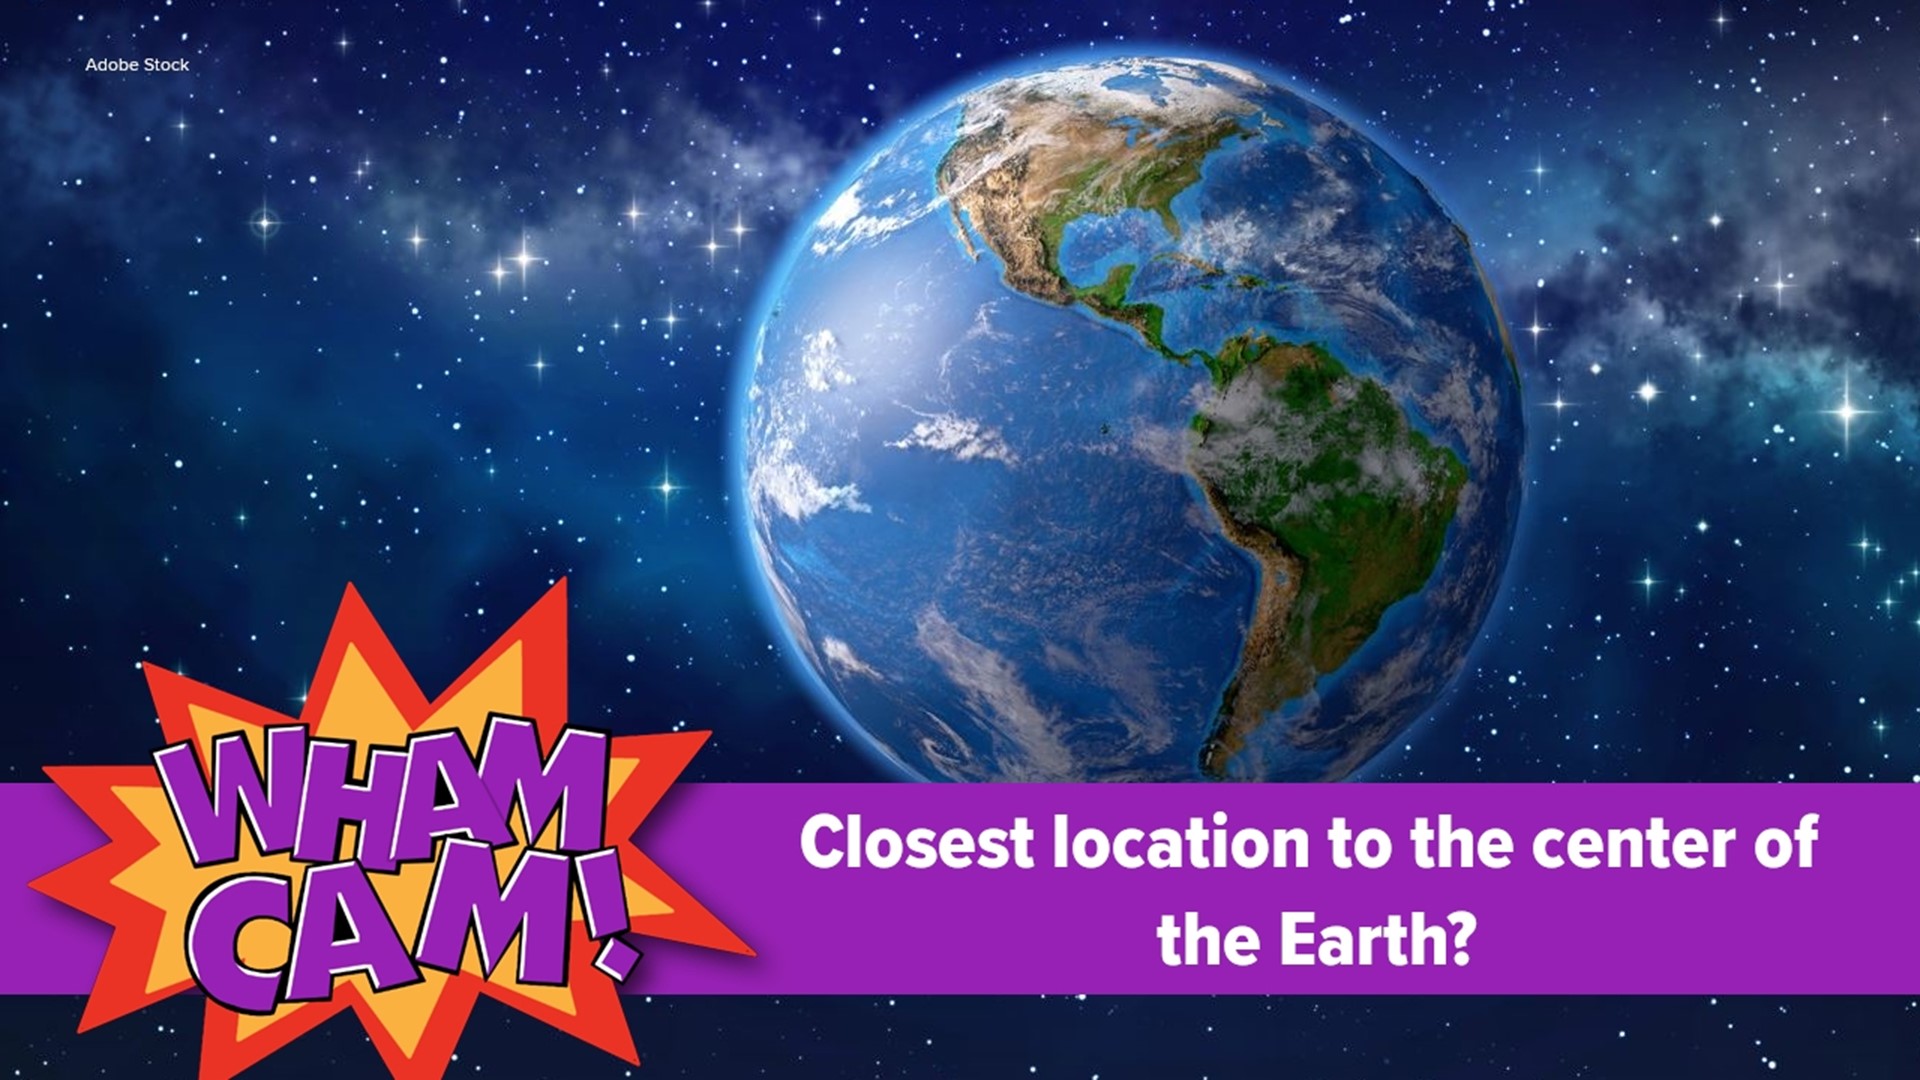 Where would we have to go on the plant to be closest to the center of the Earth? Joe headed to Dunmore to see if anyone there had the answer to this week's Wham Cam.